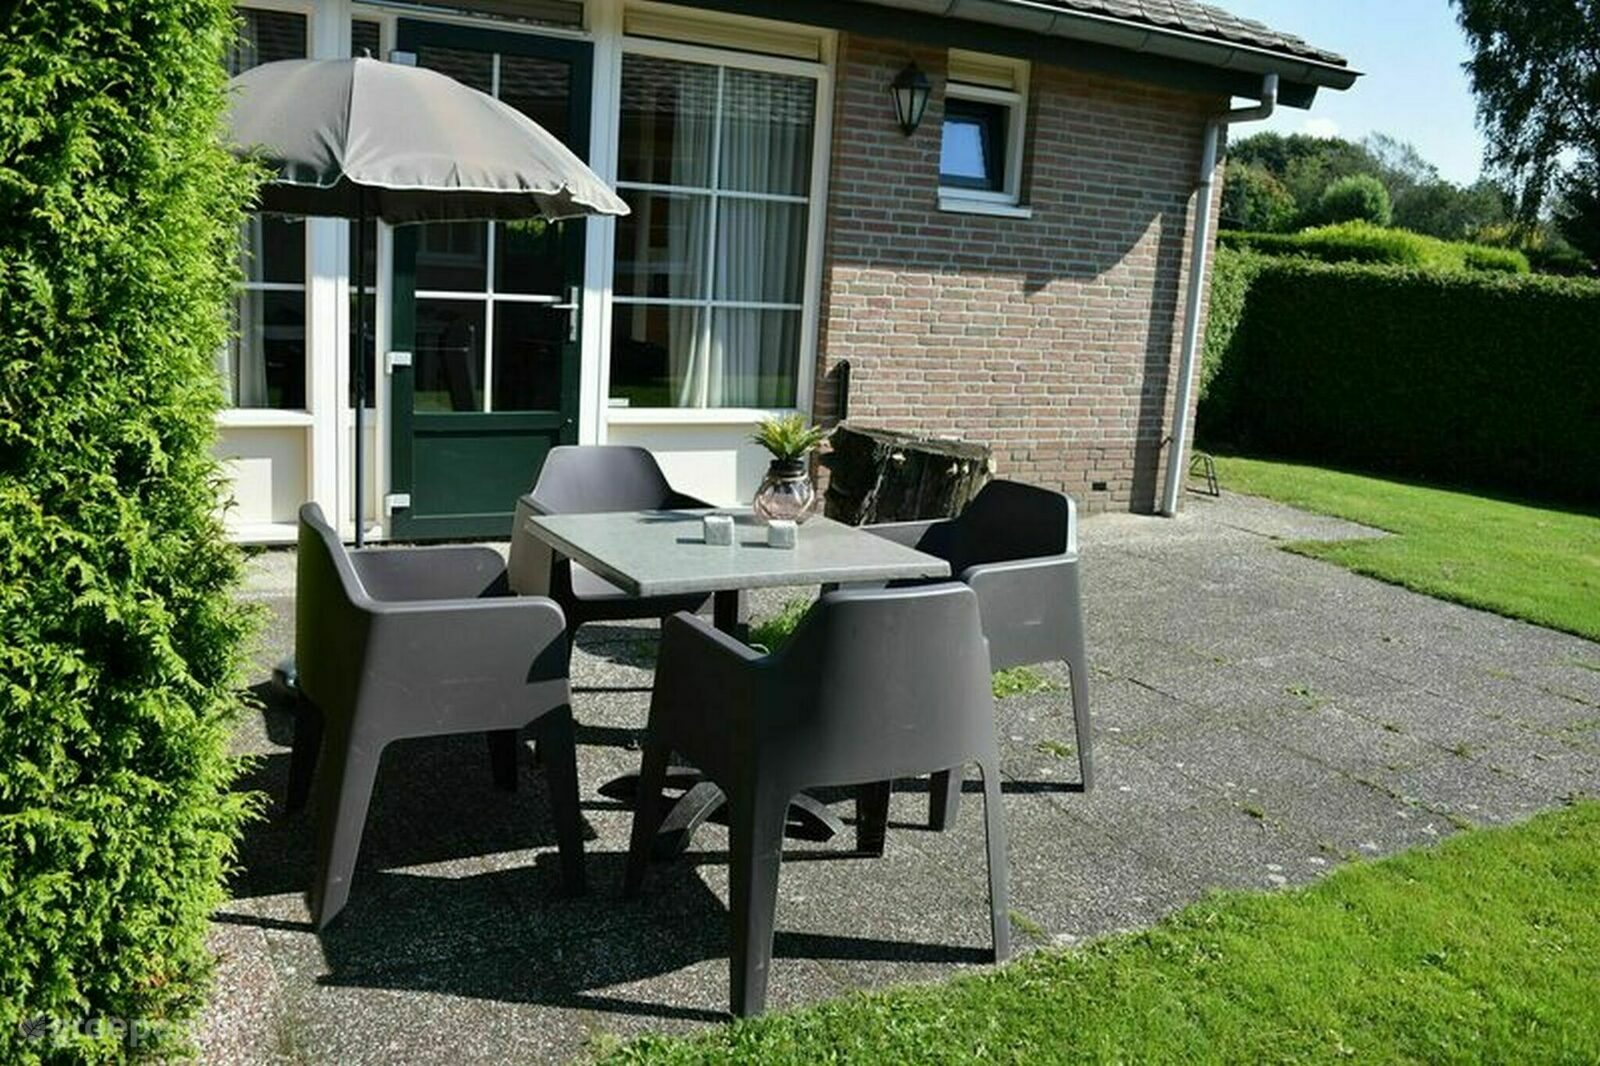 Group accommodation Voorthuizen